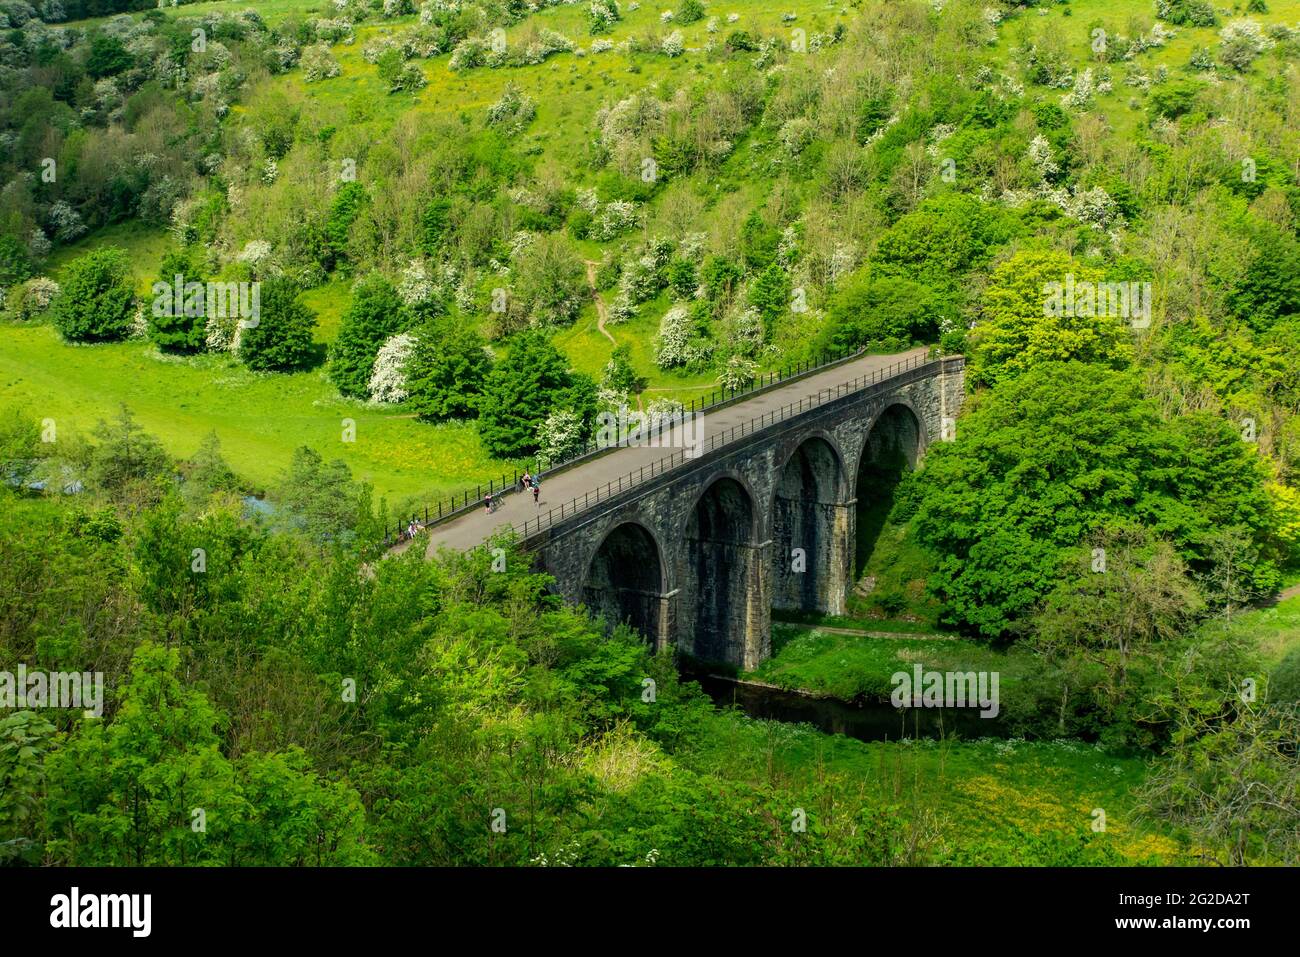 Early summer at Monsal Head a popular viewpoint in the Peak District National Park Derbyshire England UK with Monsal Viaduct in foreground. Stock Photo